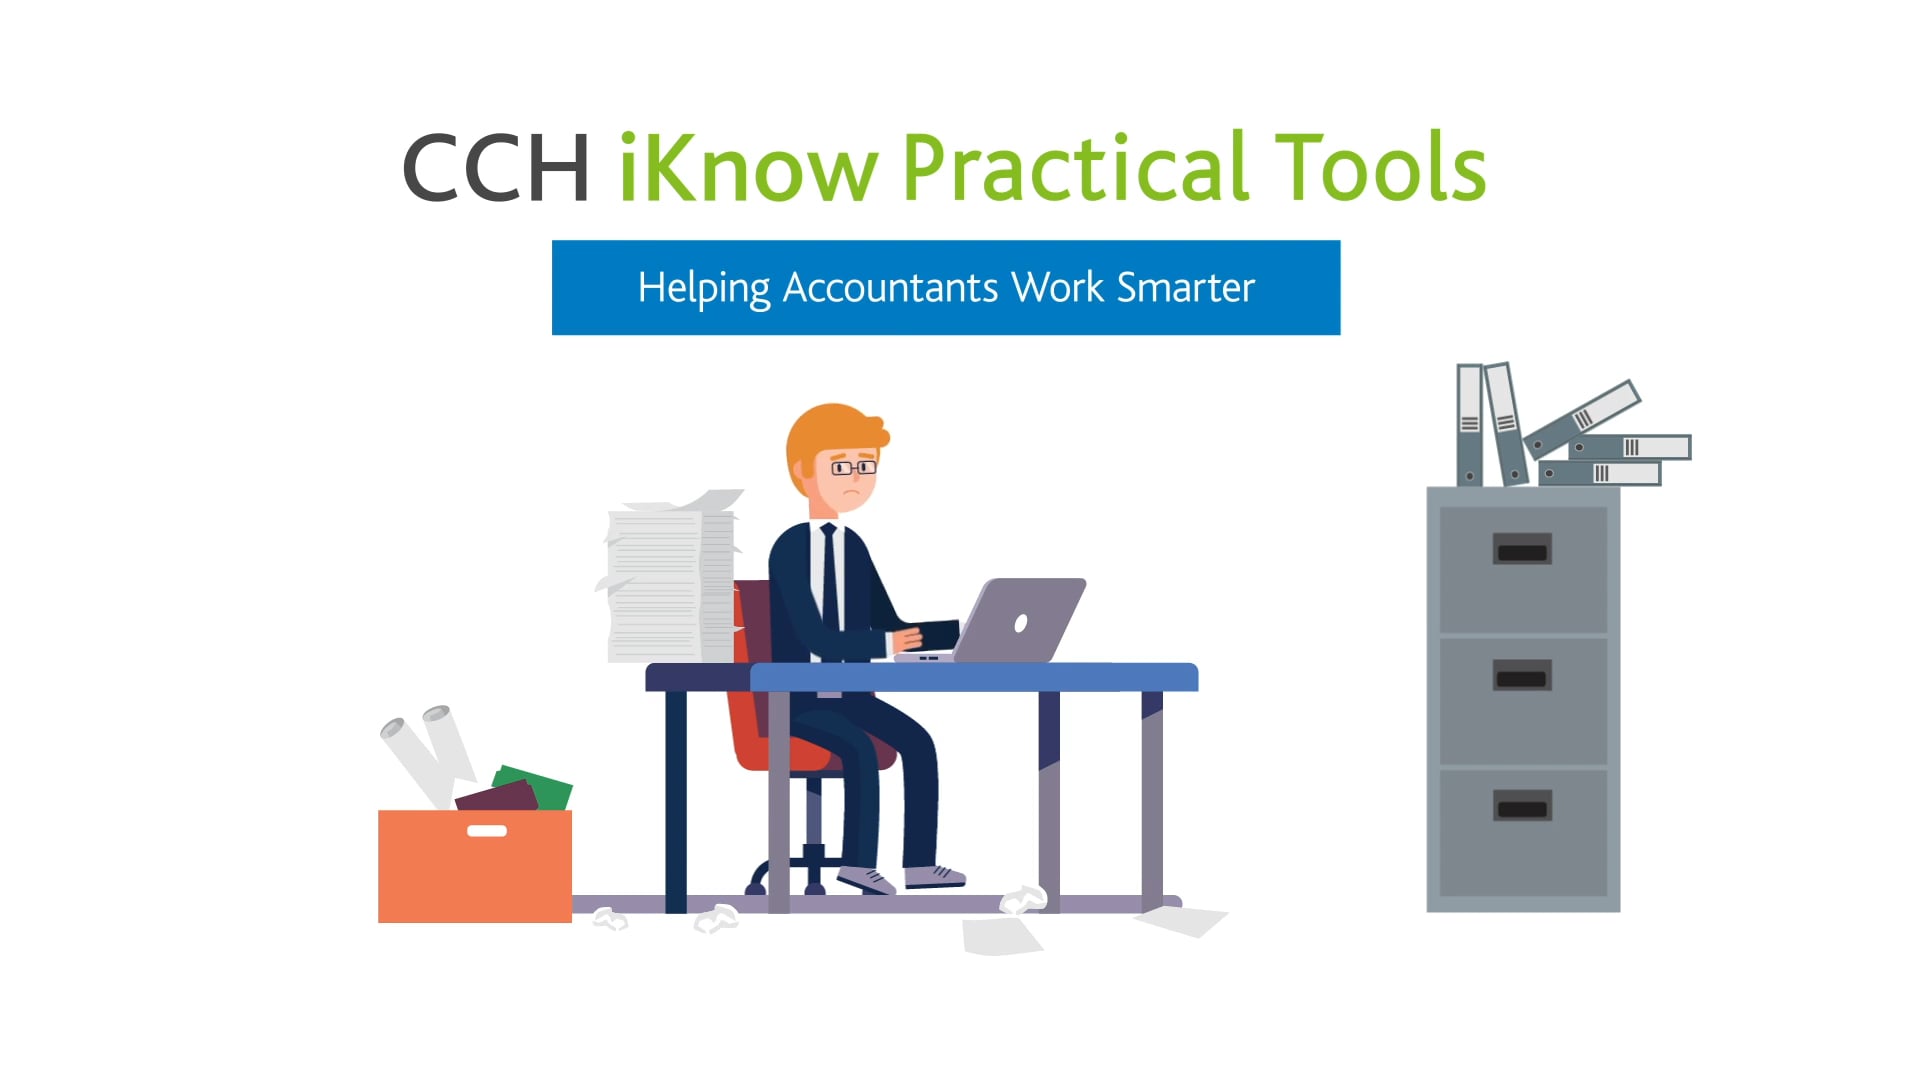 CCH iKnow Practical Tools